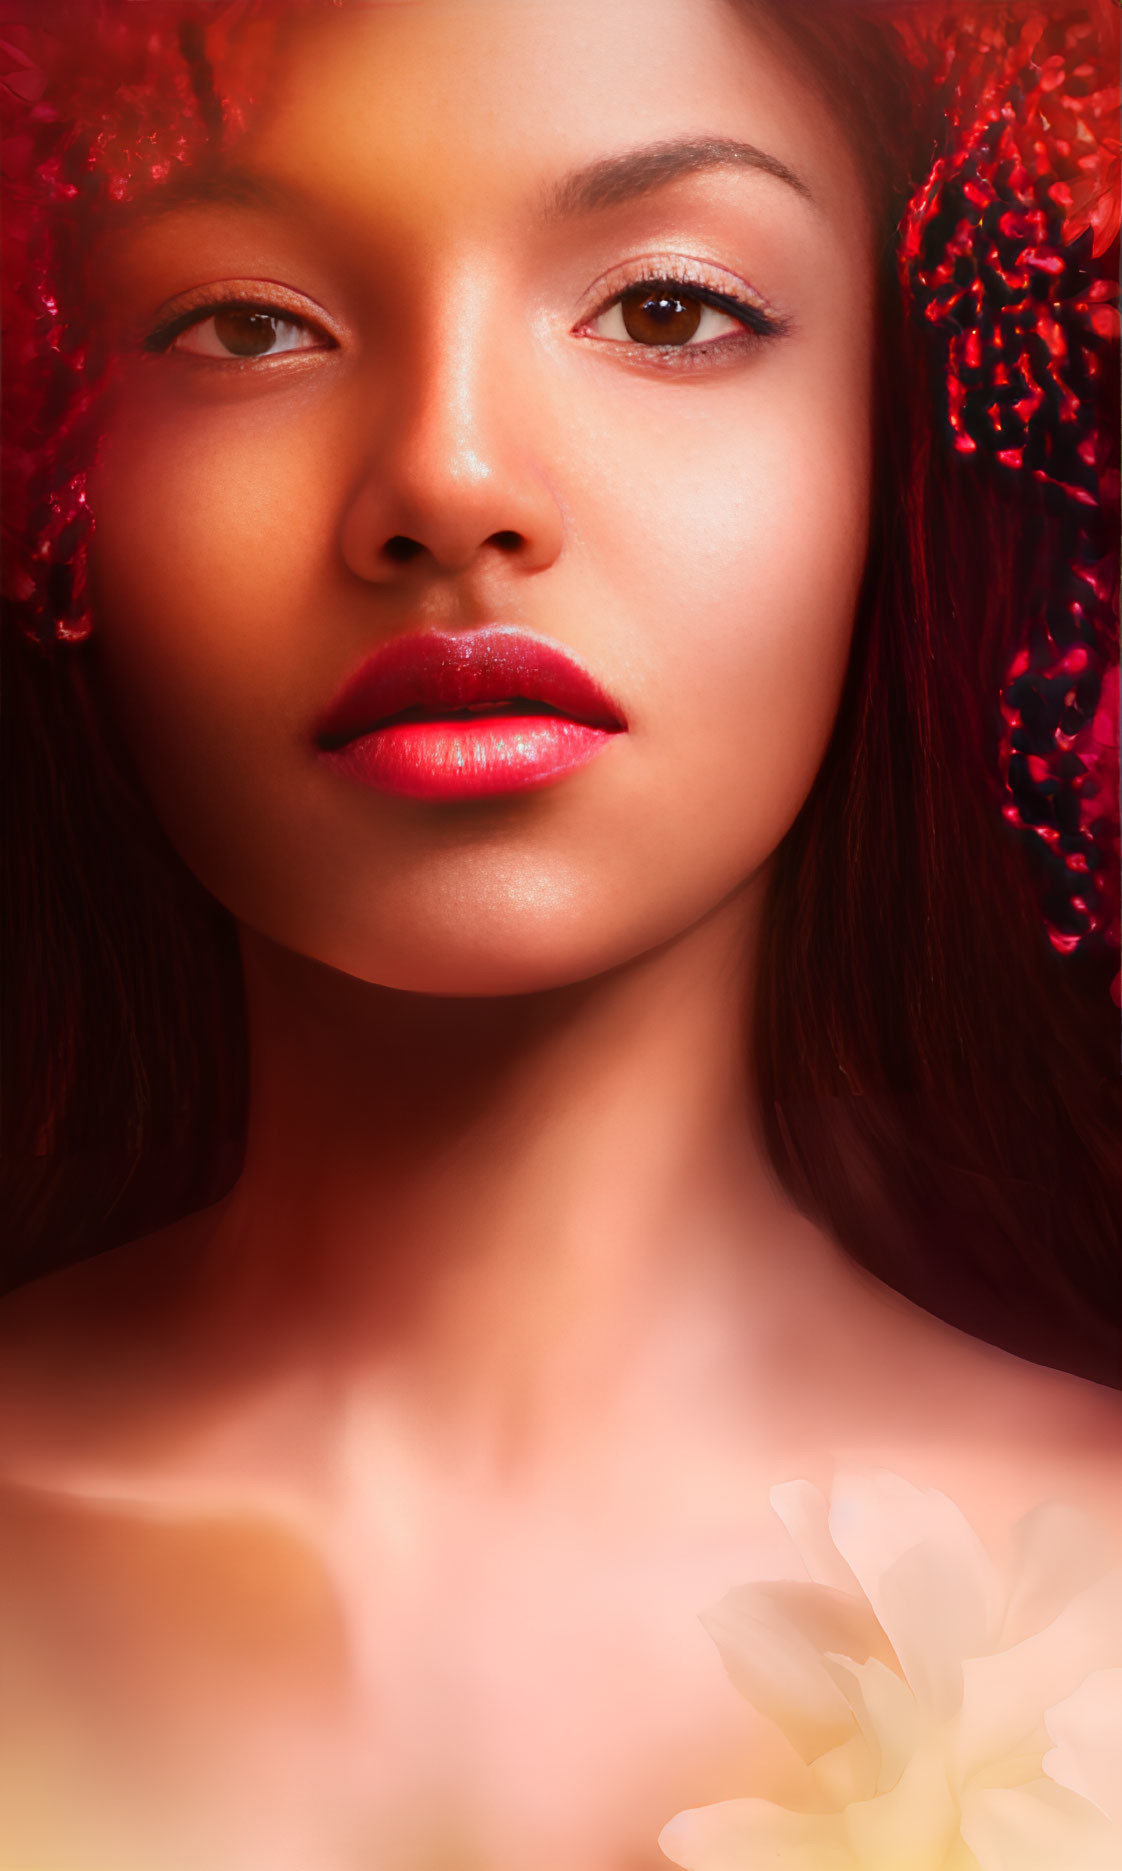 Woman with red floral adornments gazing against warm background